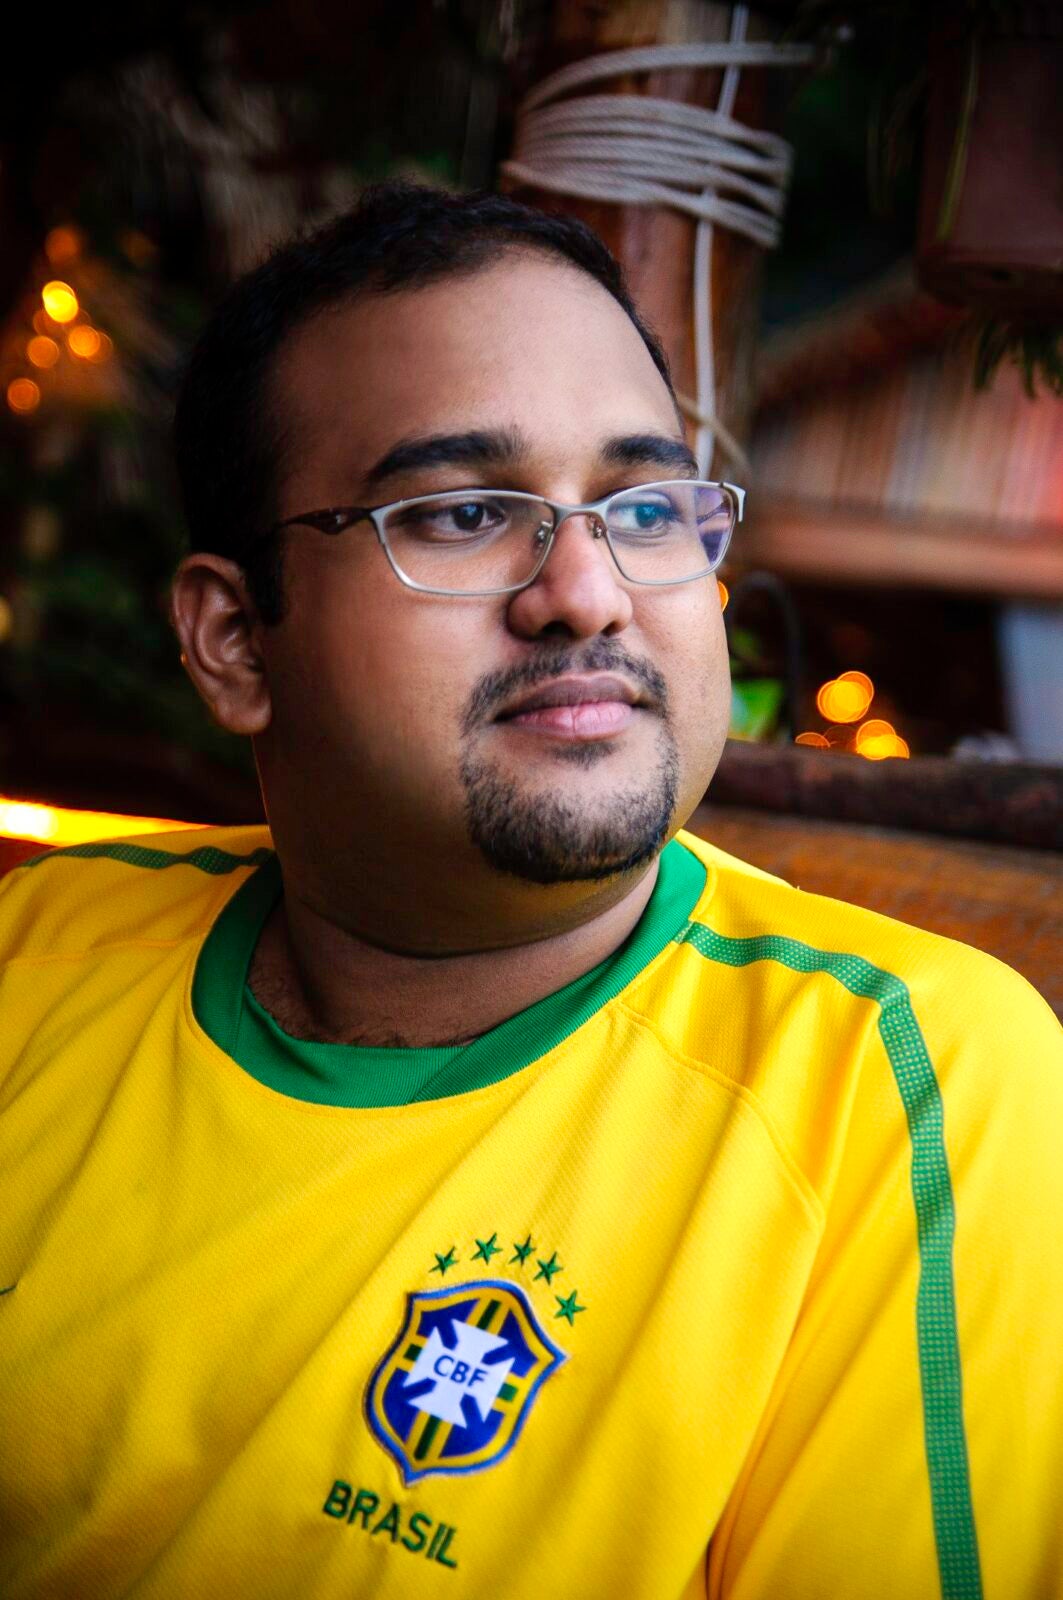 An Indian Bearded Man Wearing Glasses And Brazil'S Football Jersey Looking To His Left.